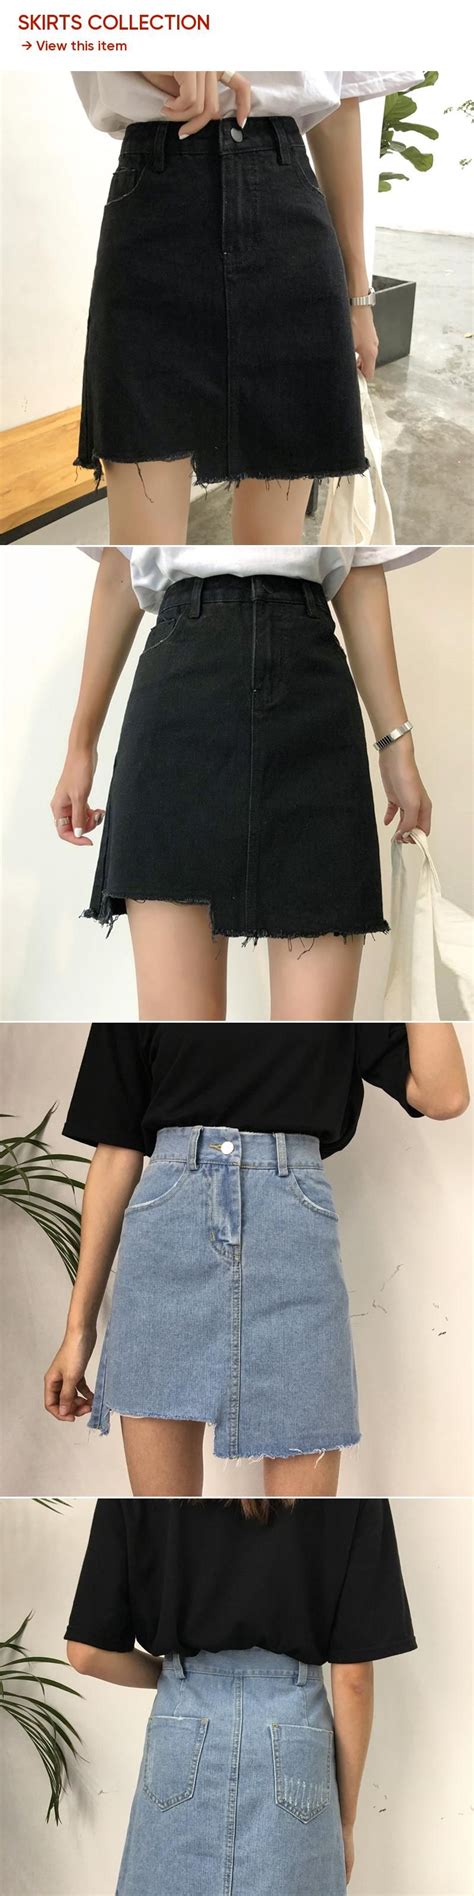 Kpop Harajuku 2018 New All Matched Casual Jeans Skirt Summer Fashion